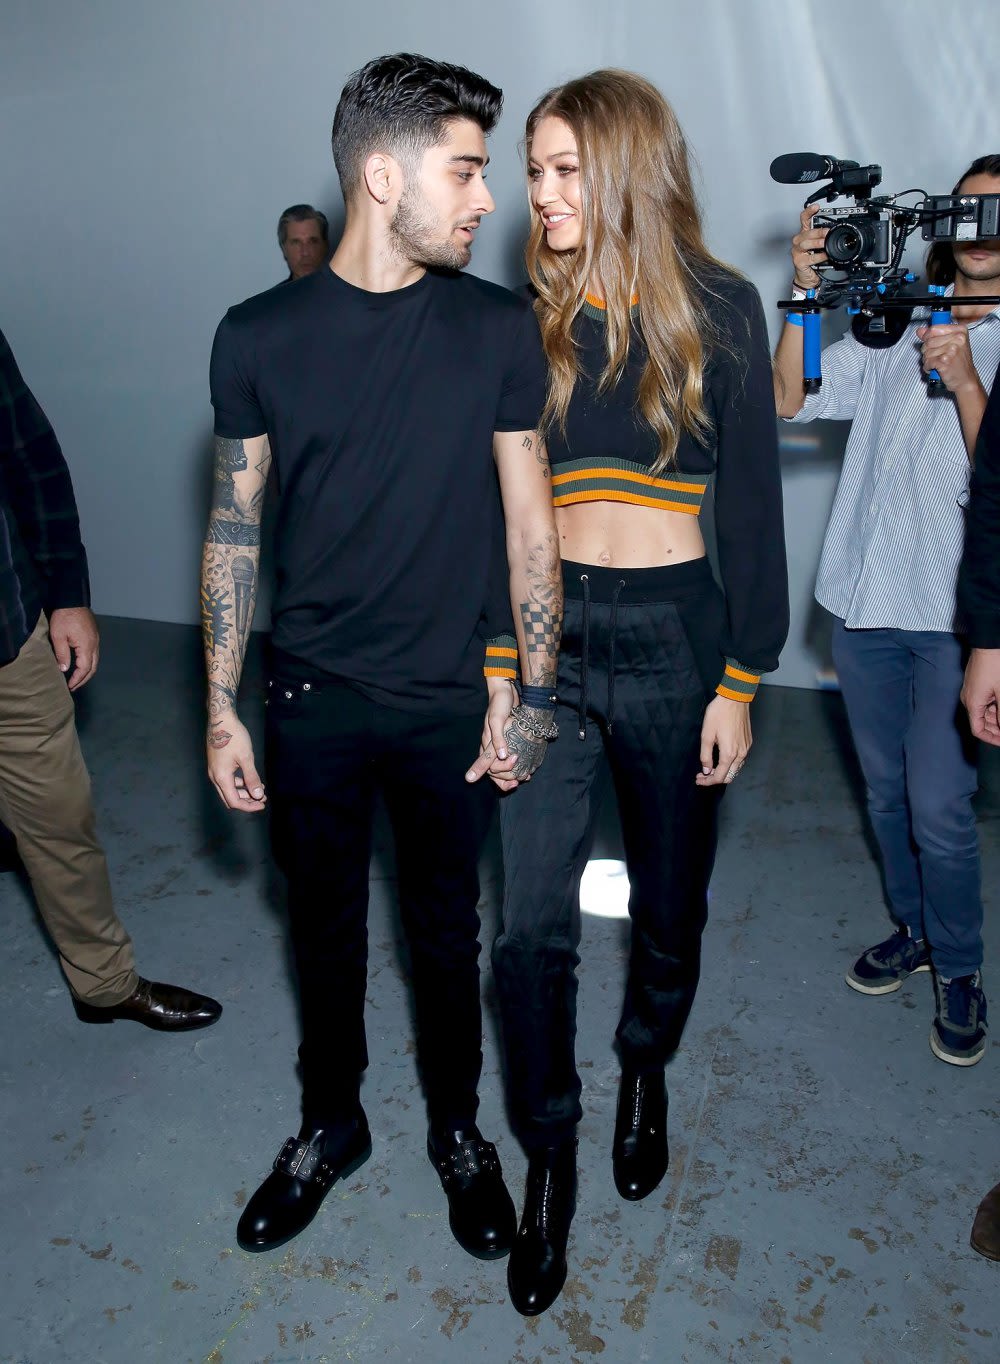 Zayn Malik 'Moved On' From Gigi Hadid, Hasn't 'Truly Been in Love'